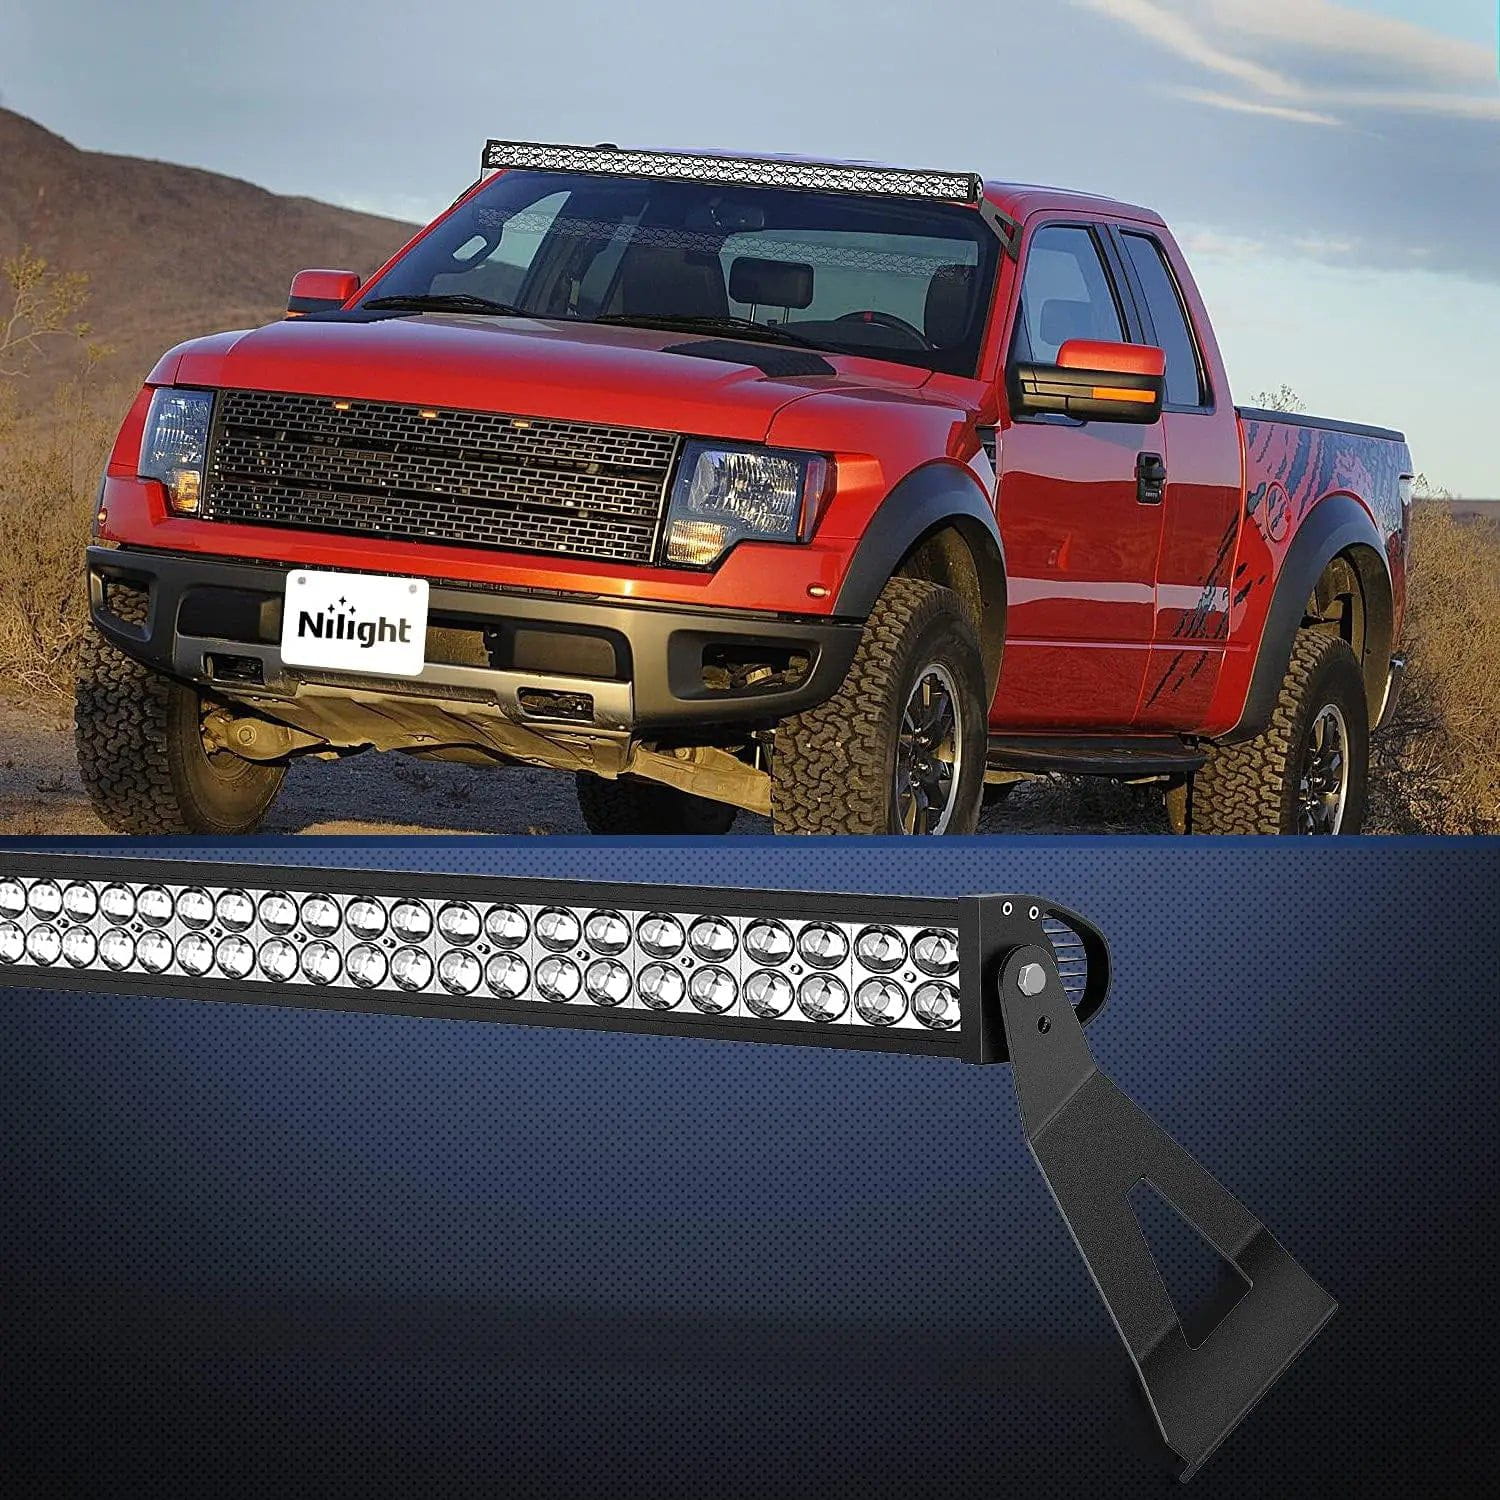 Mounting Accessory 52” Curved Light Bar Bracket at Upper Windshield Roof Cab for 2004-2018 Ford F150 & SVT Raptor (Pair)